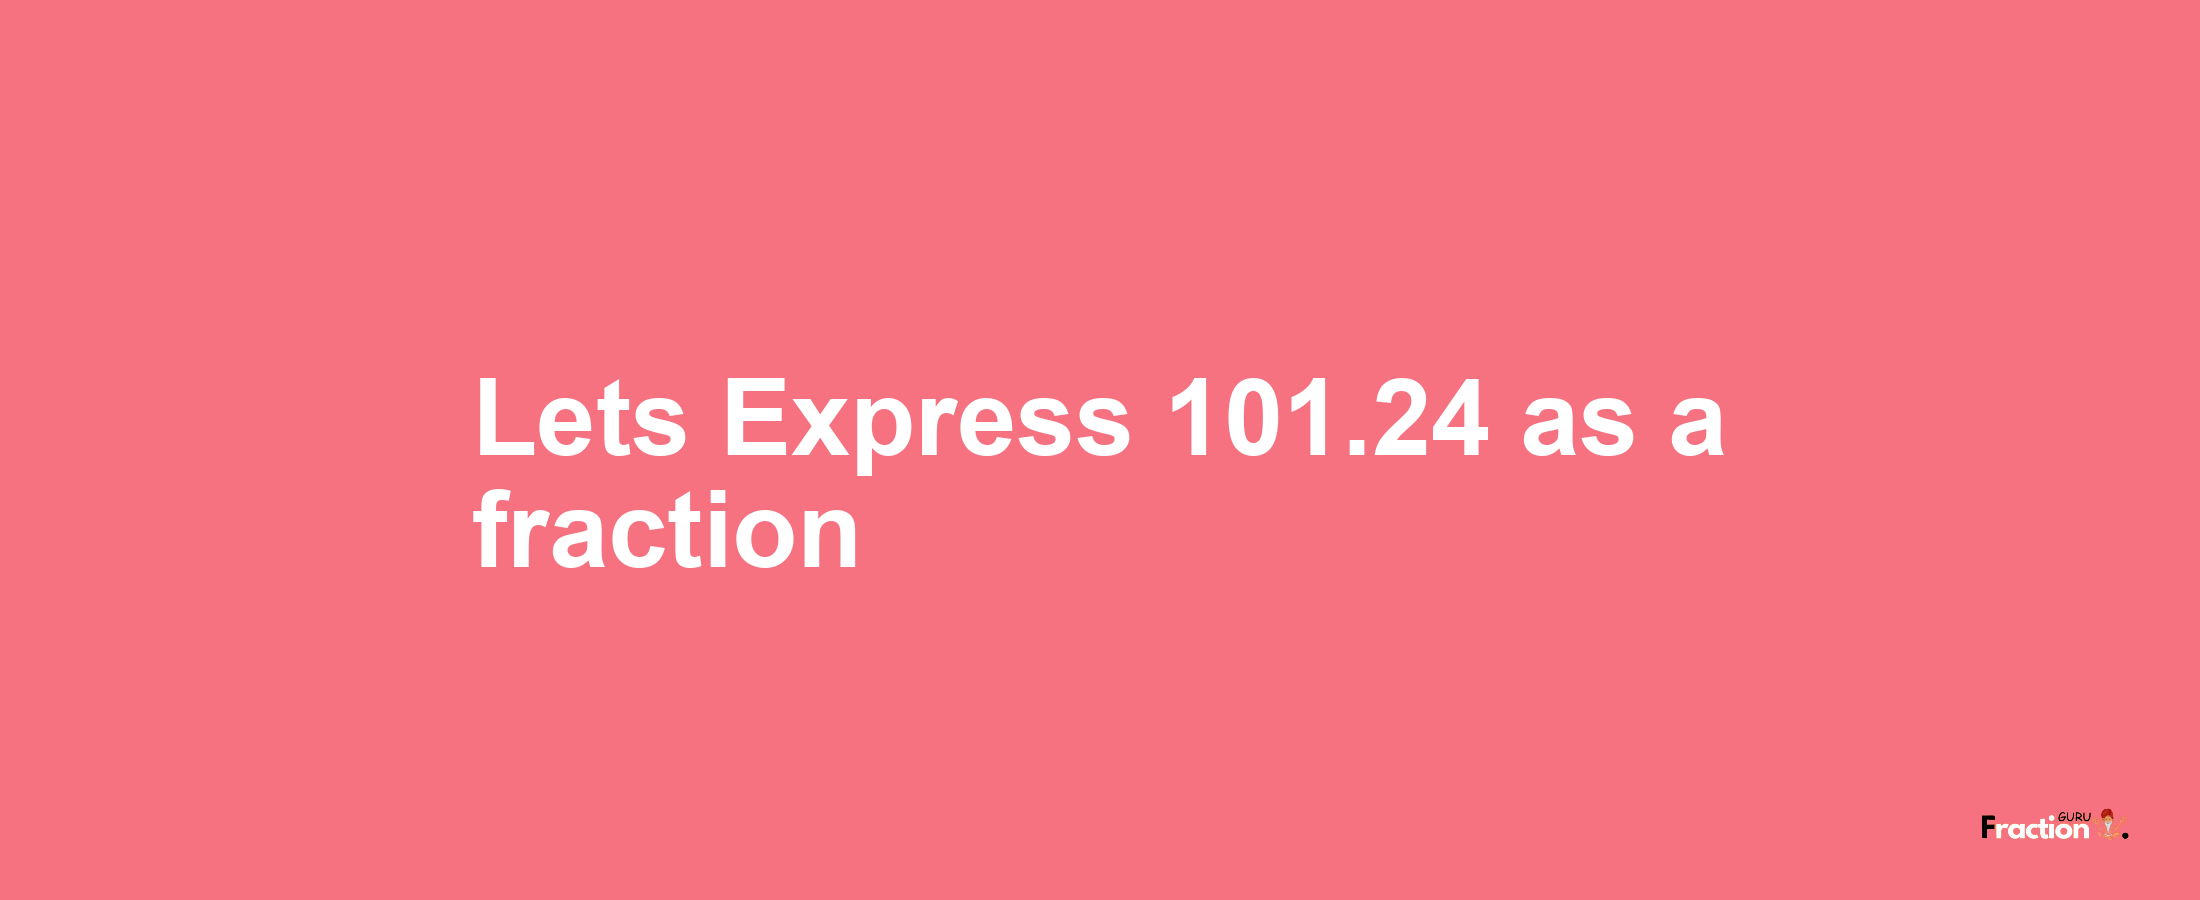 Lets Express 101.24 as afraction